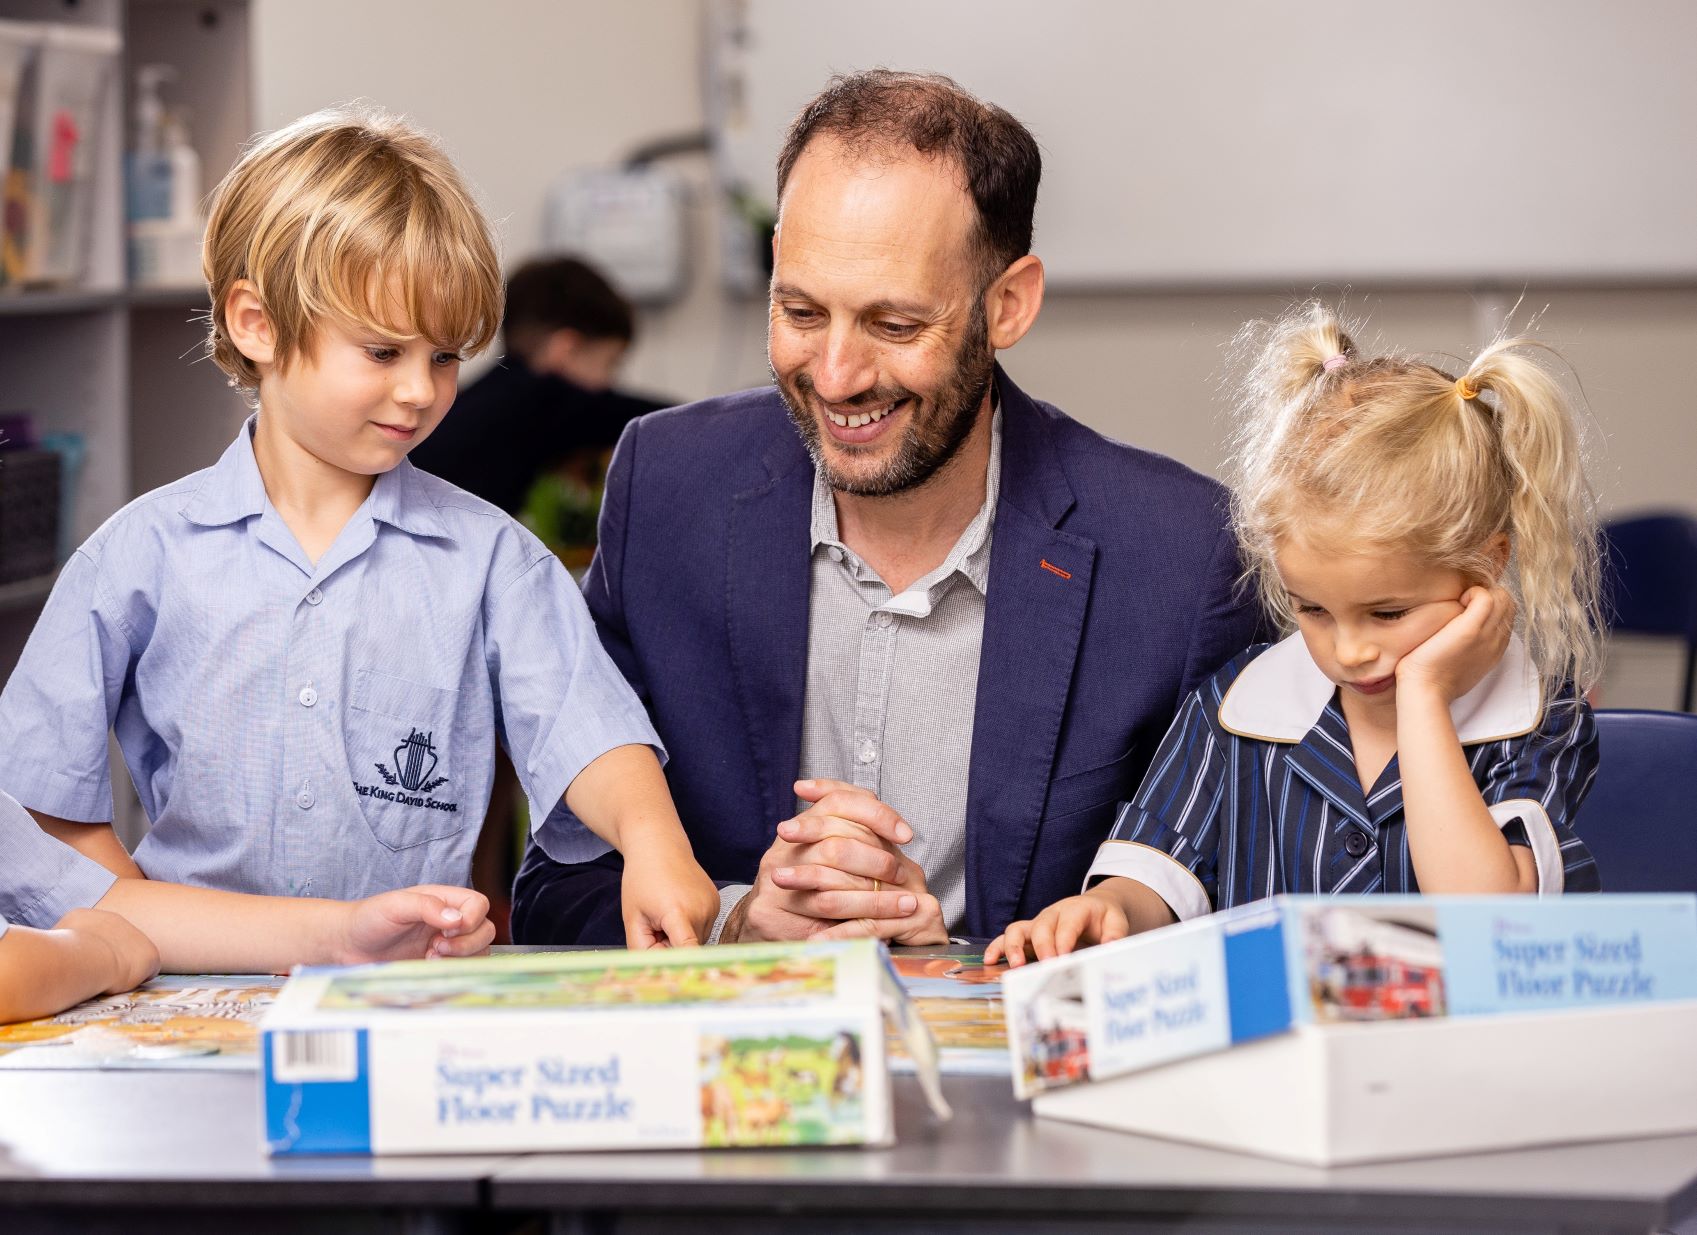 Principal Marc Light is with two Prep students. They are facing the camera and looking down at a game they are playing. They are at their first day of school - building a love of learning and strong Jewish identity.